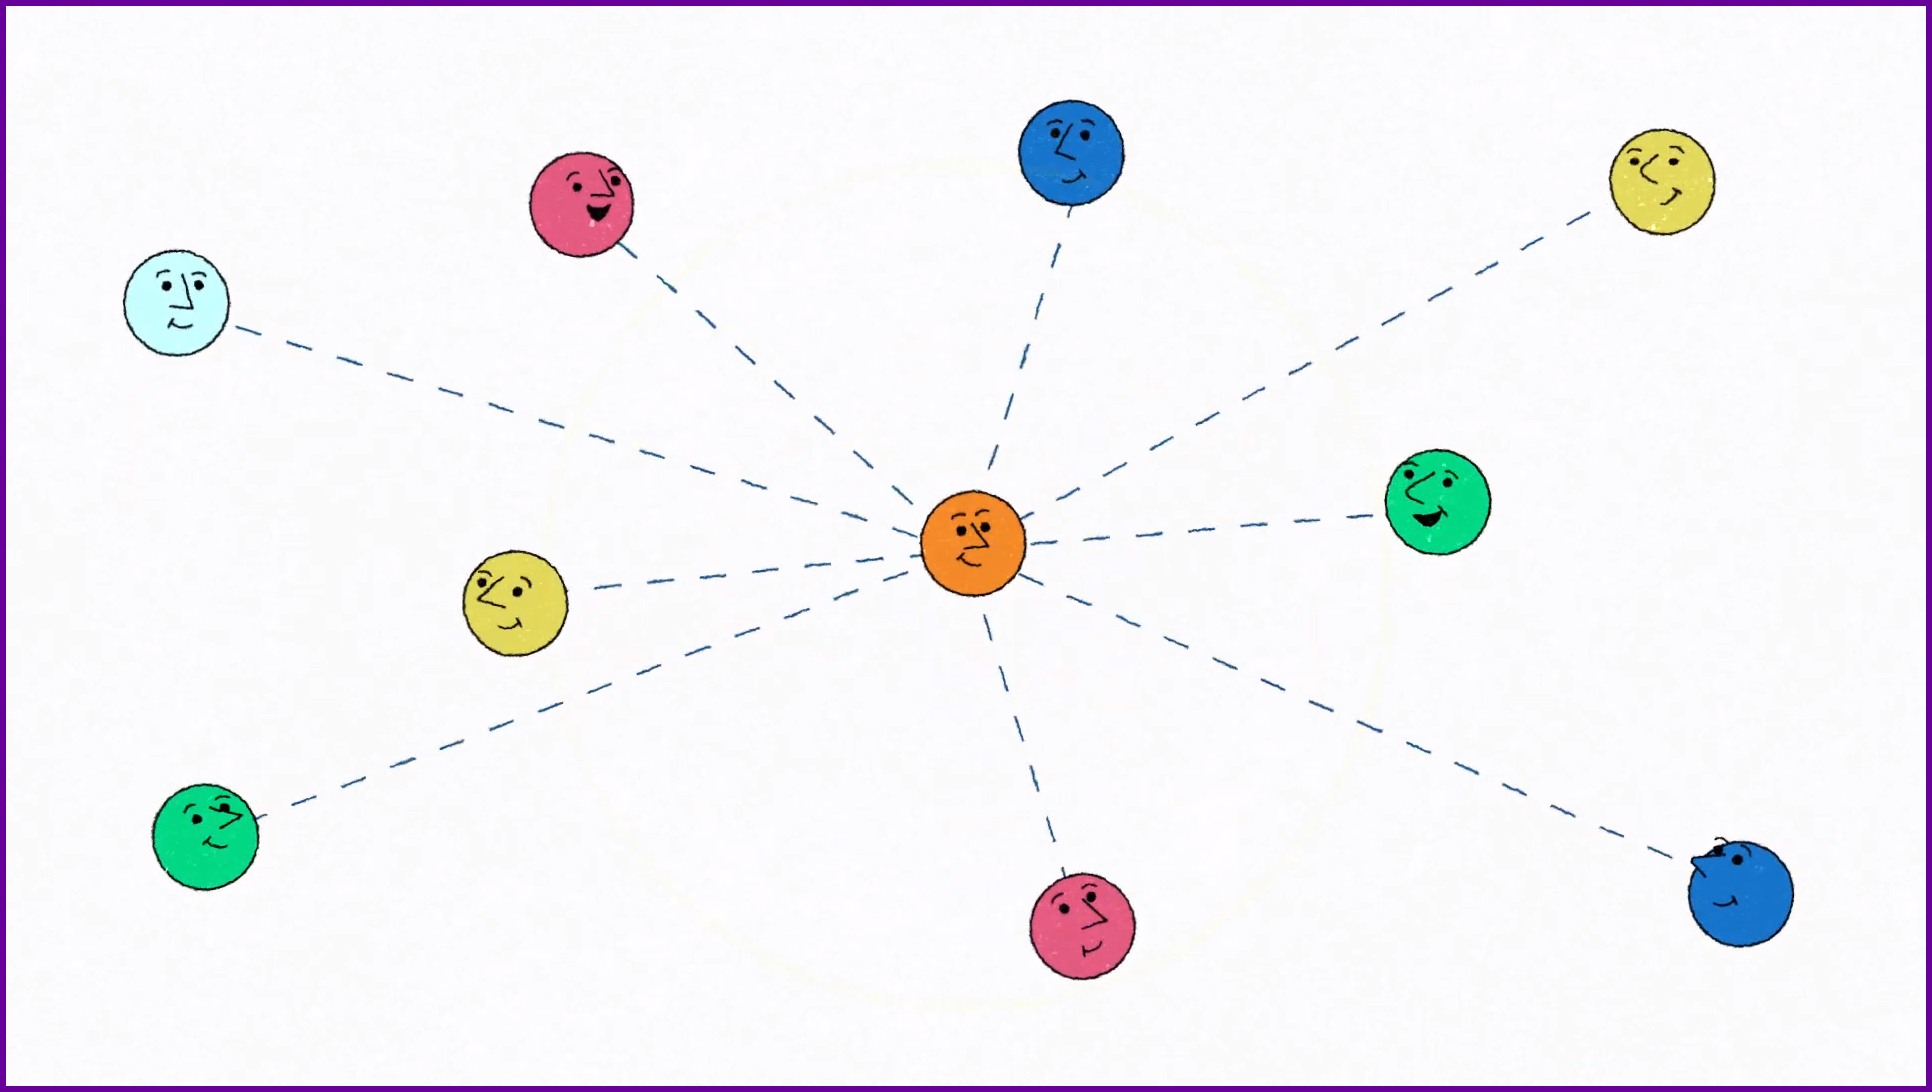 A graphic showing a network of smiling faces.